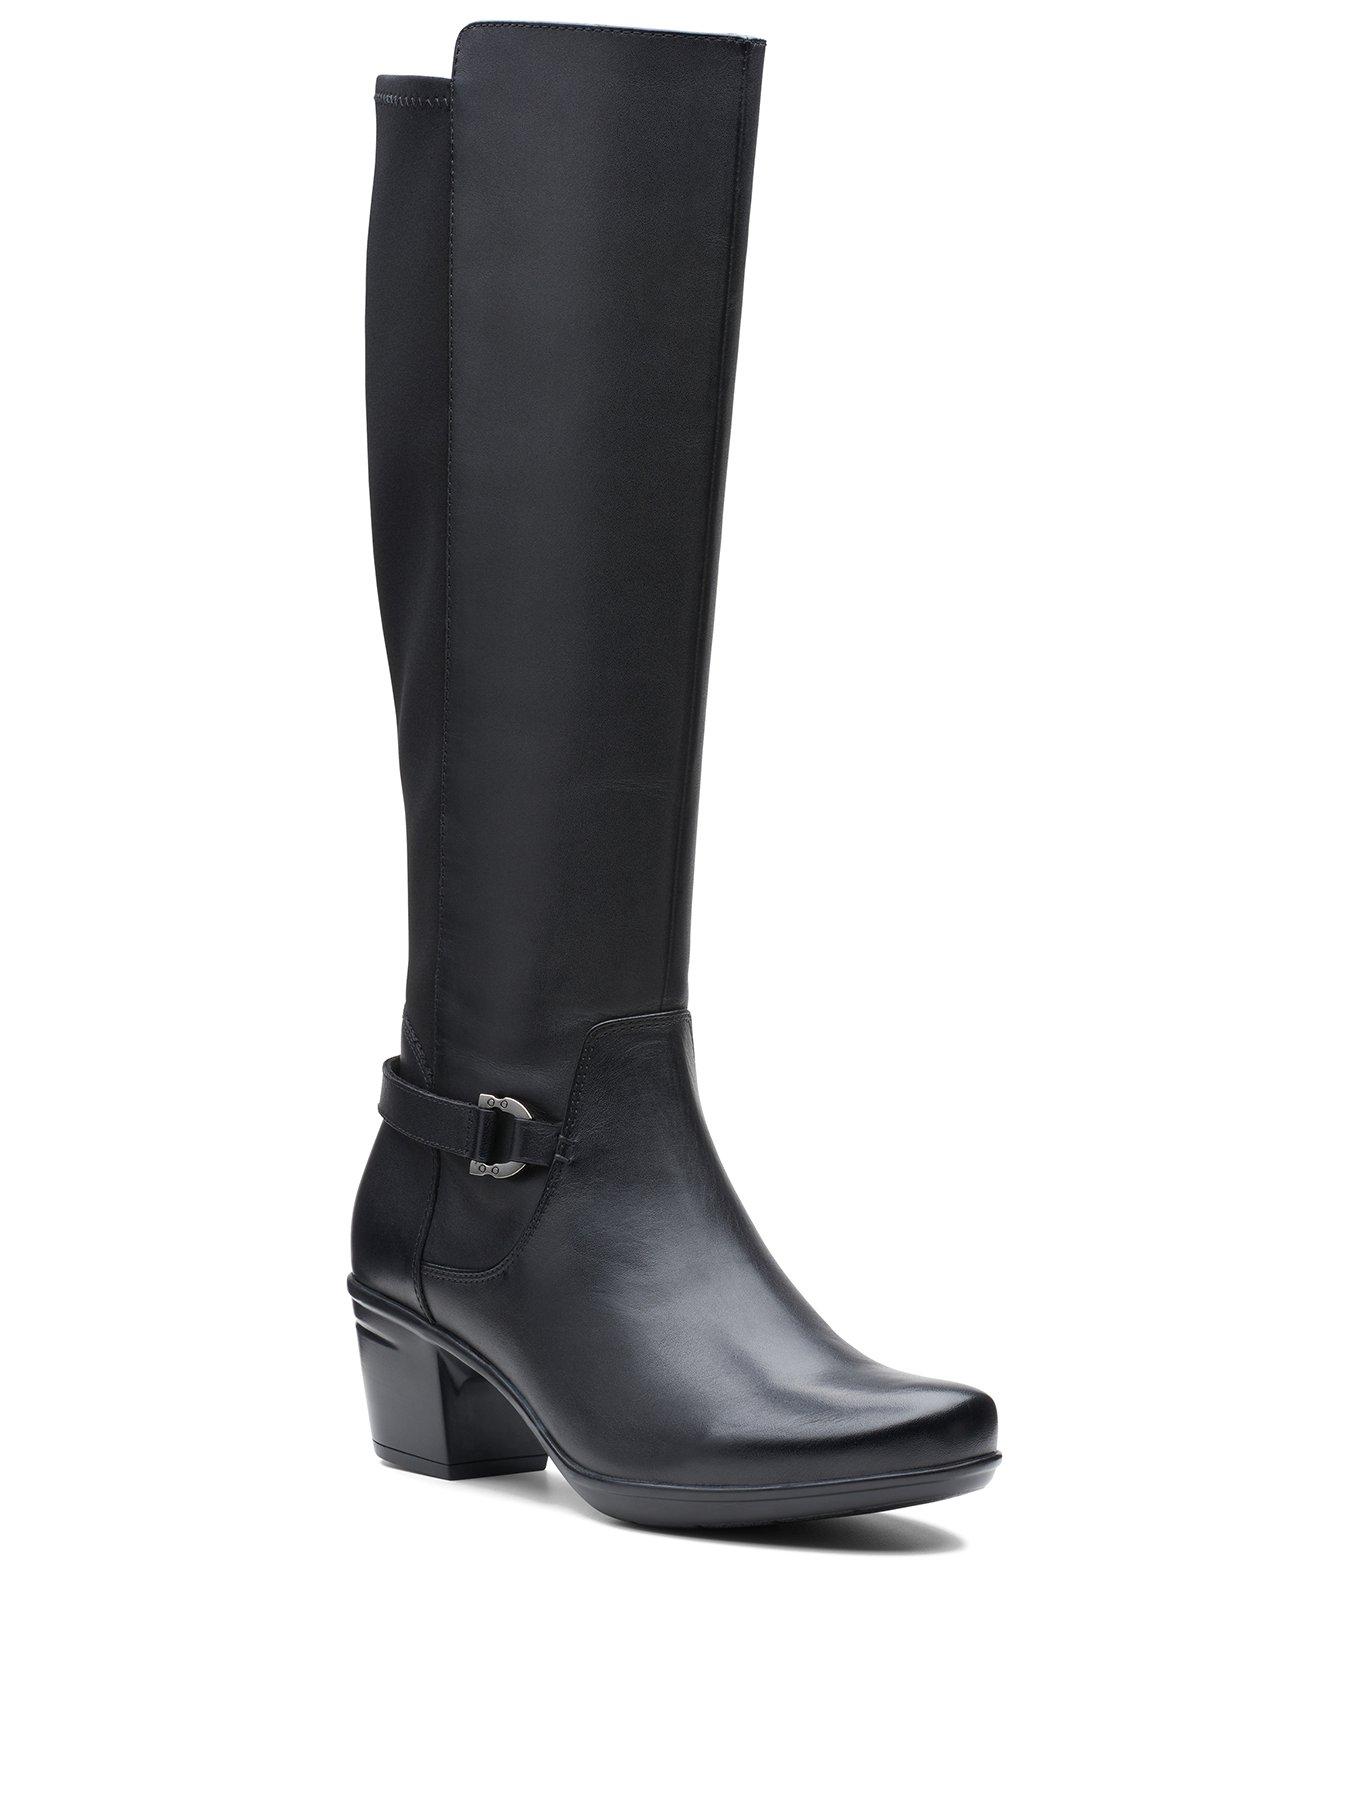 clarks high knee boots